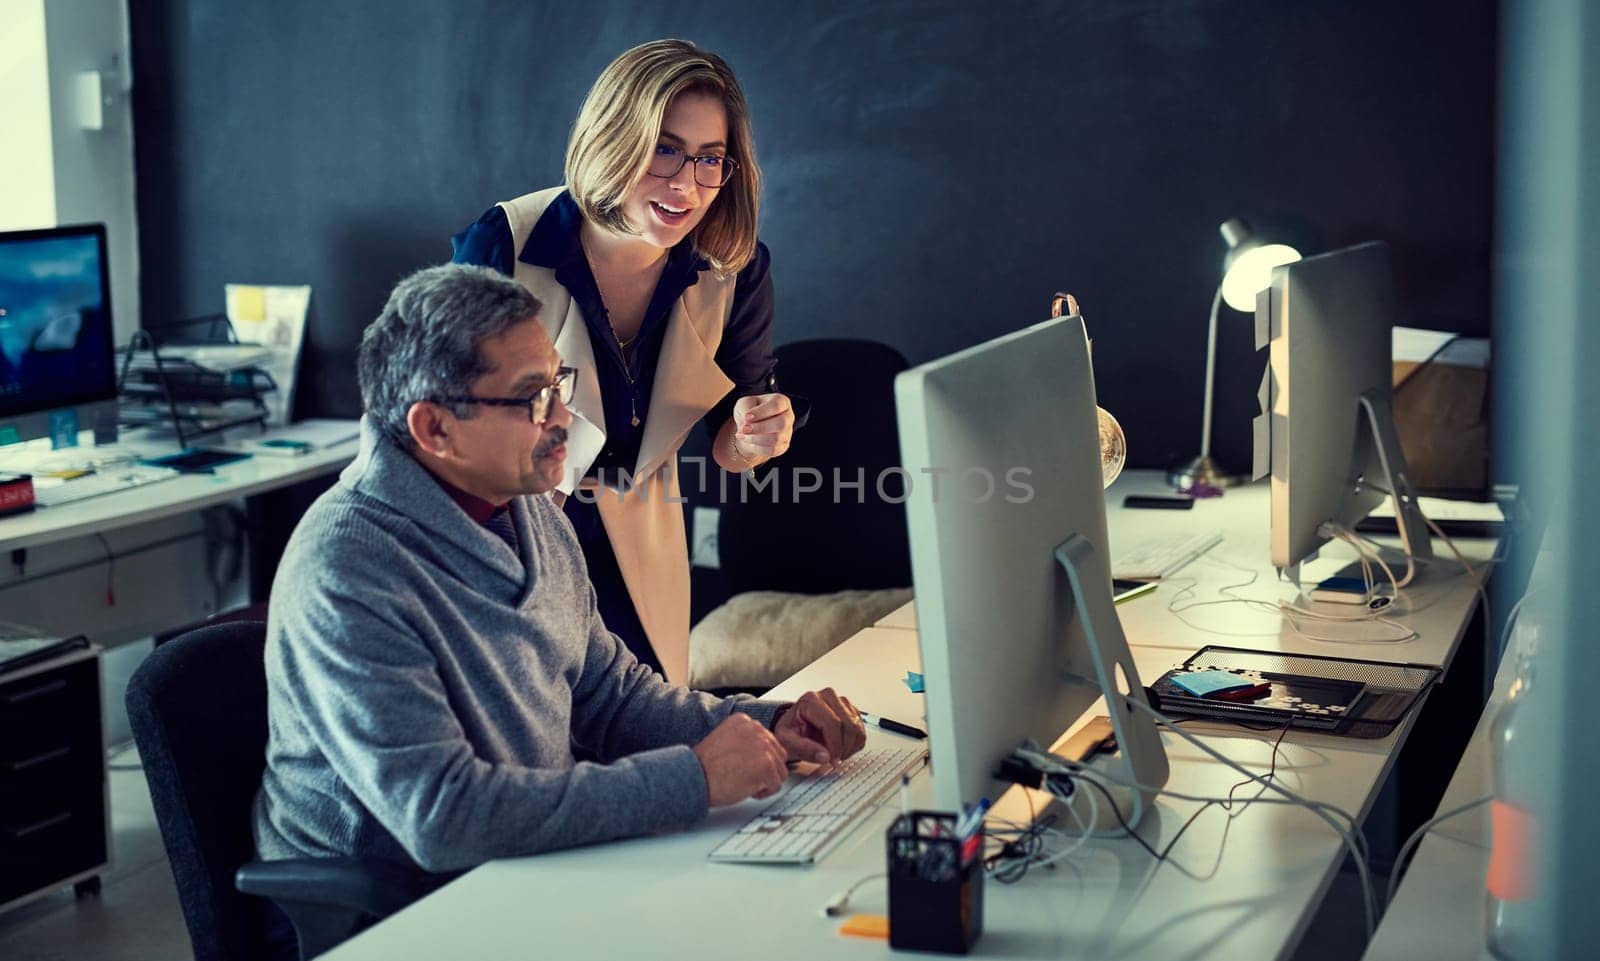 The sun may have gone down but their determination hasnt. two businesspeople working late in an office